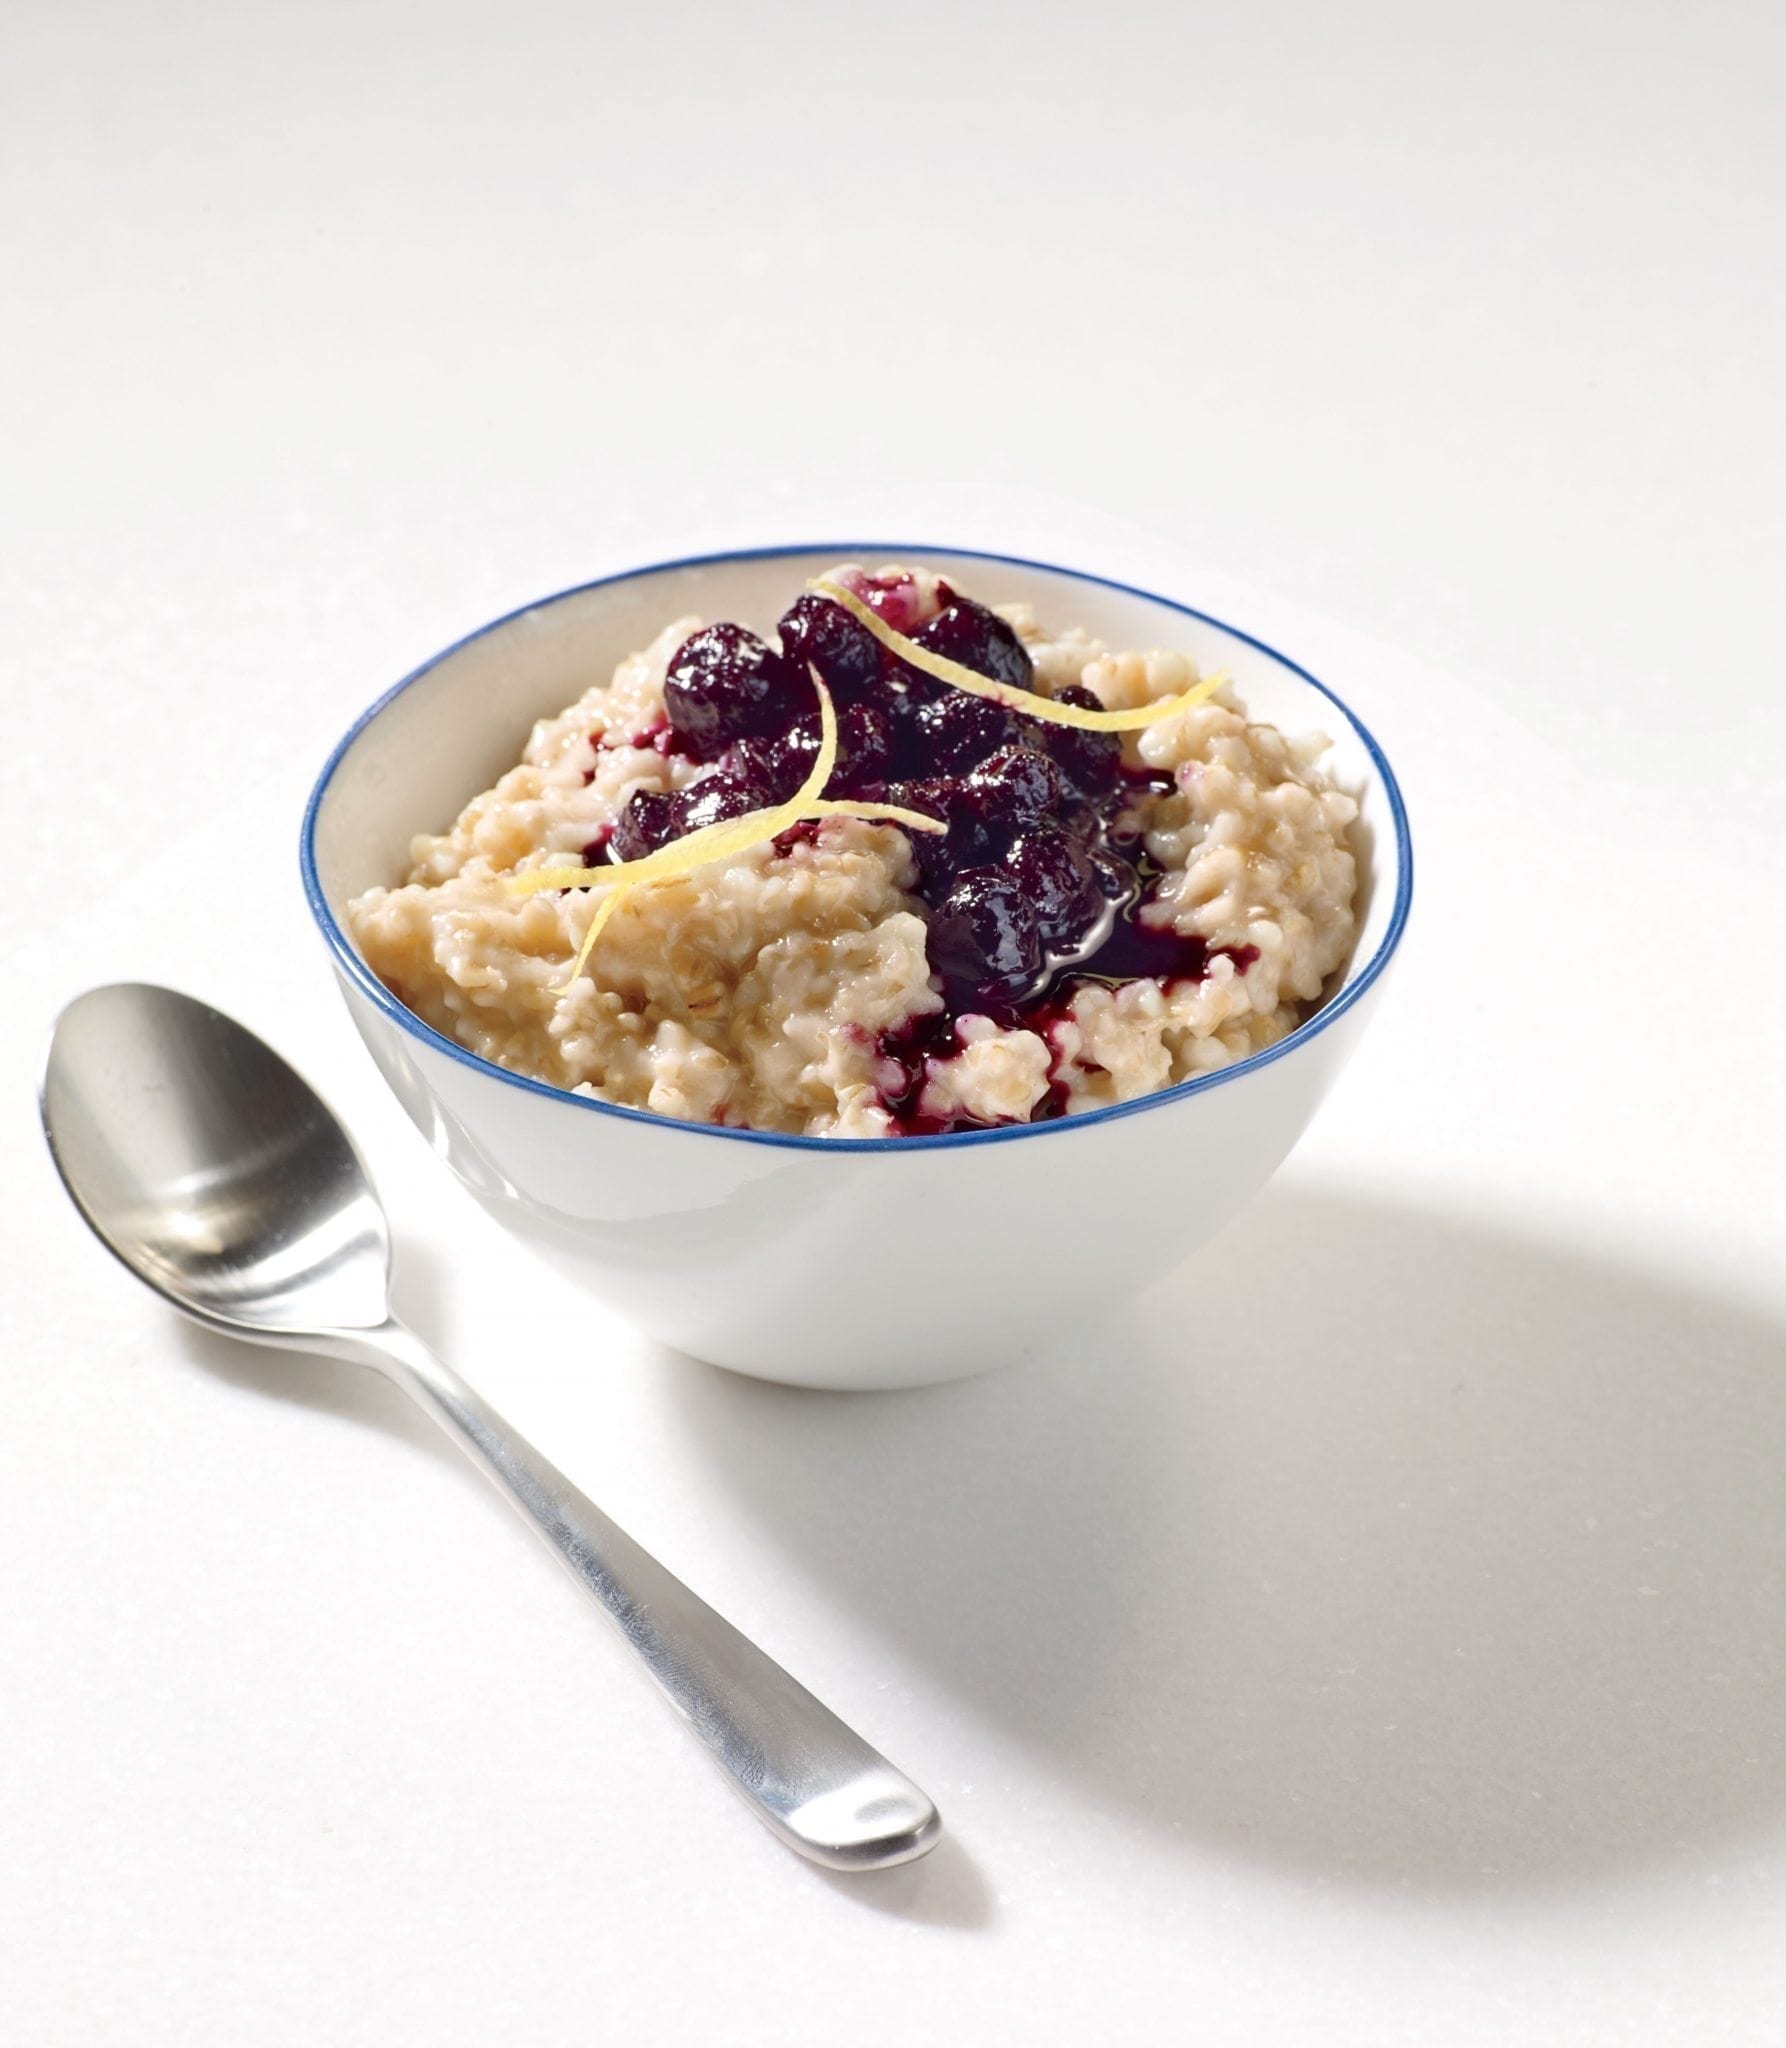 Steel-Cut Oatmeal with Blueberry Compote